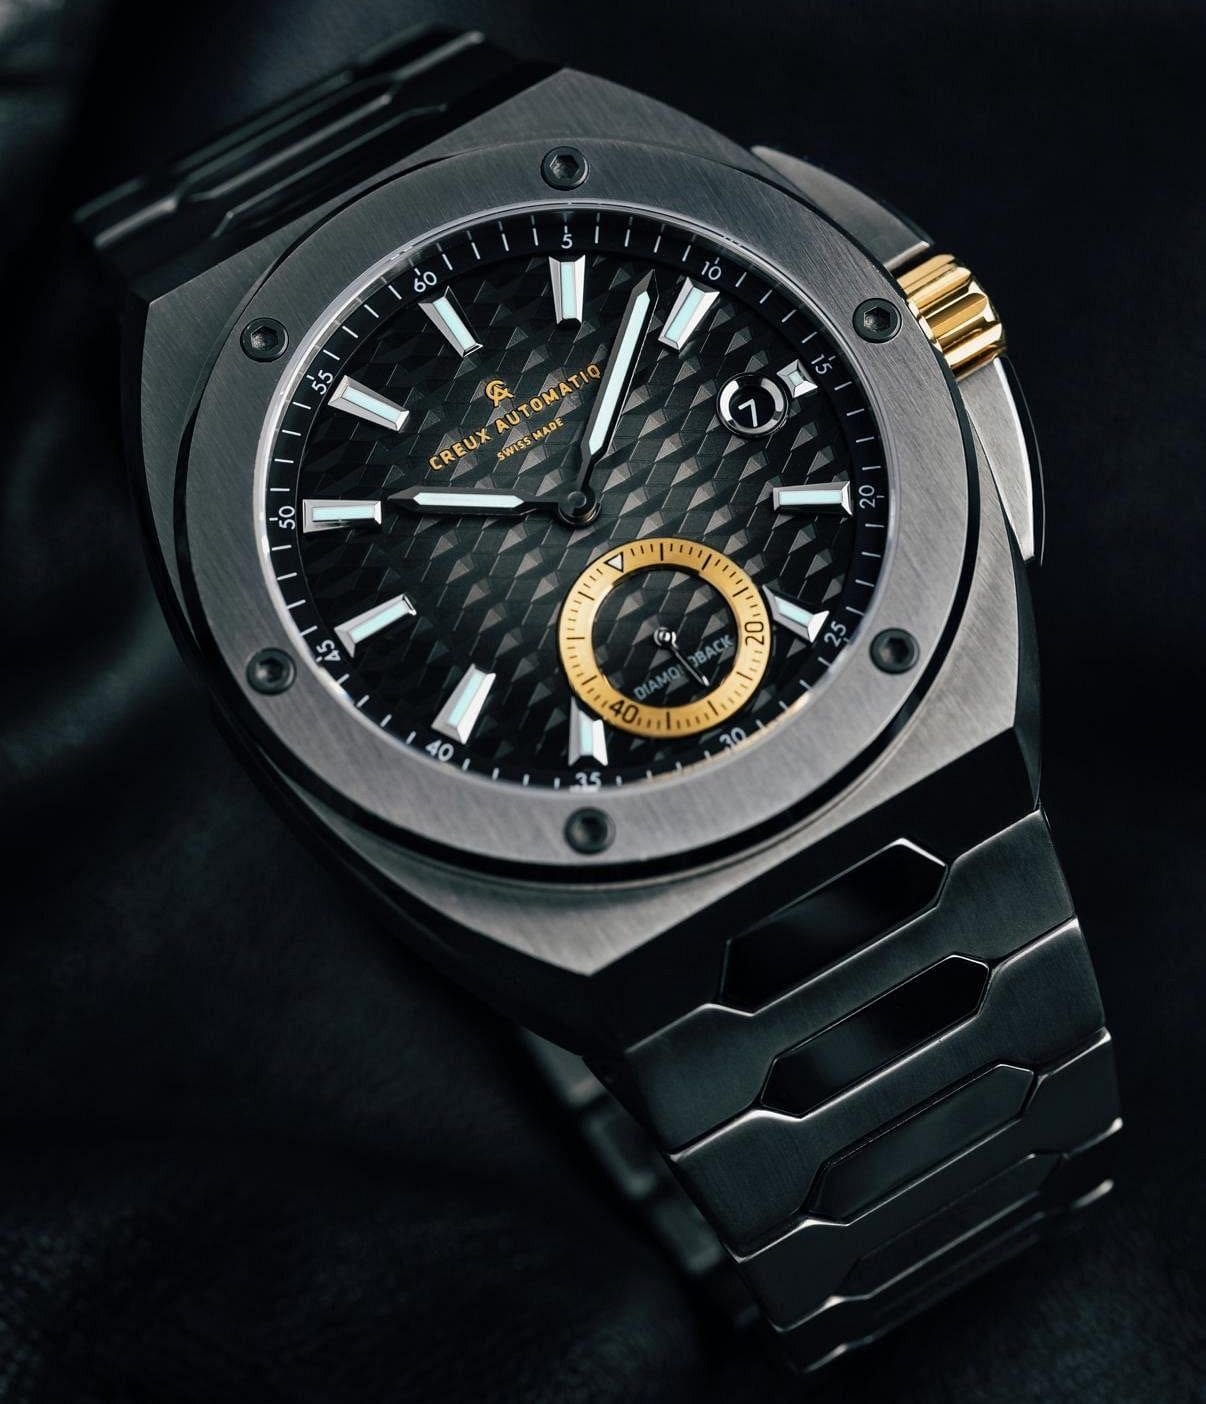 Micro magic: 3 microbrand watches that got everyone talking in 2019